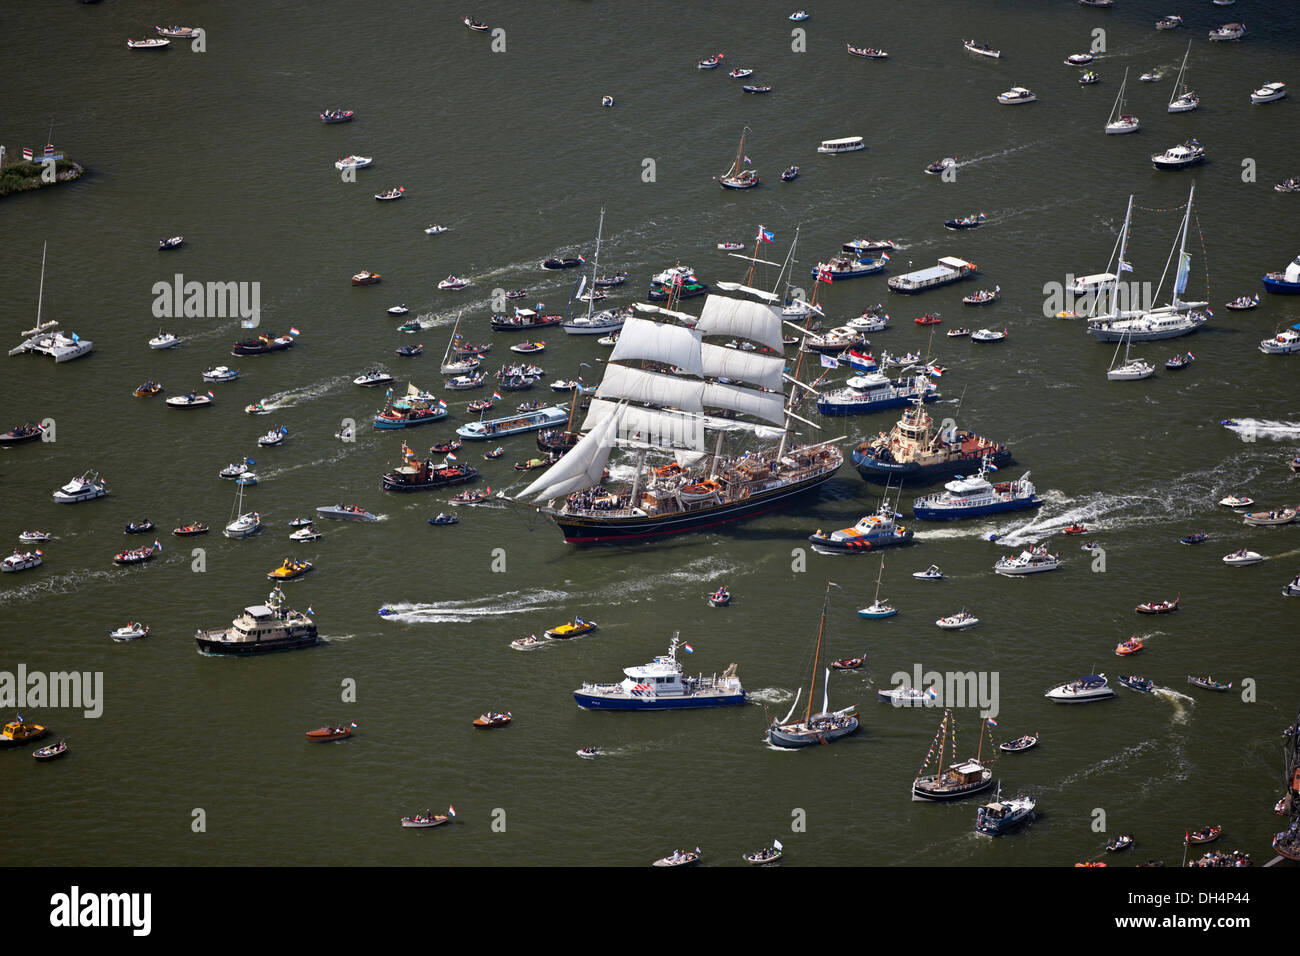 The Netherlands, Amsterdam, sailing event SAIL. Aerial of parade of tall ships. Big sailing boat called Clipper Stad Amsterdam. Noordzeekanaal. Stock Photo